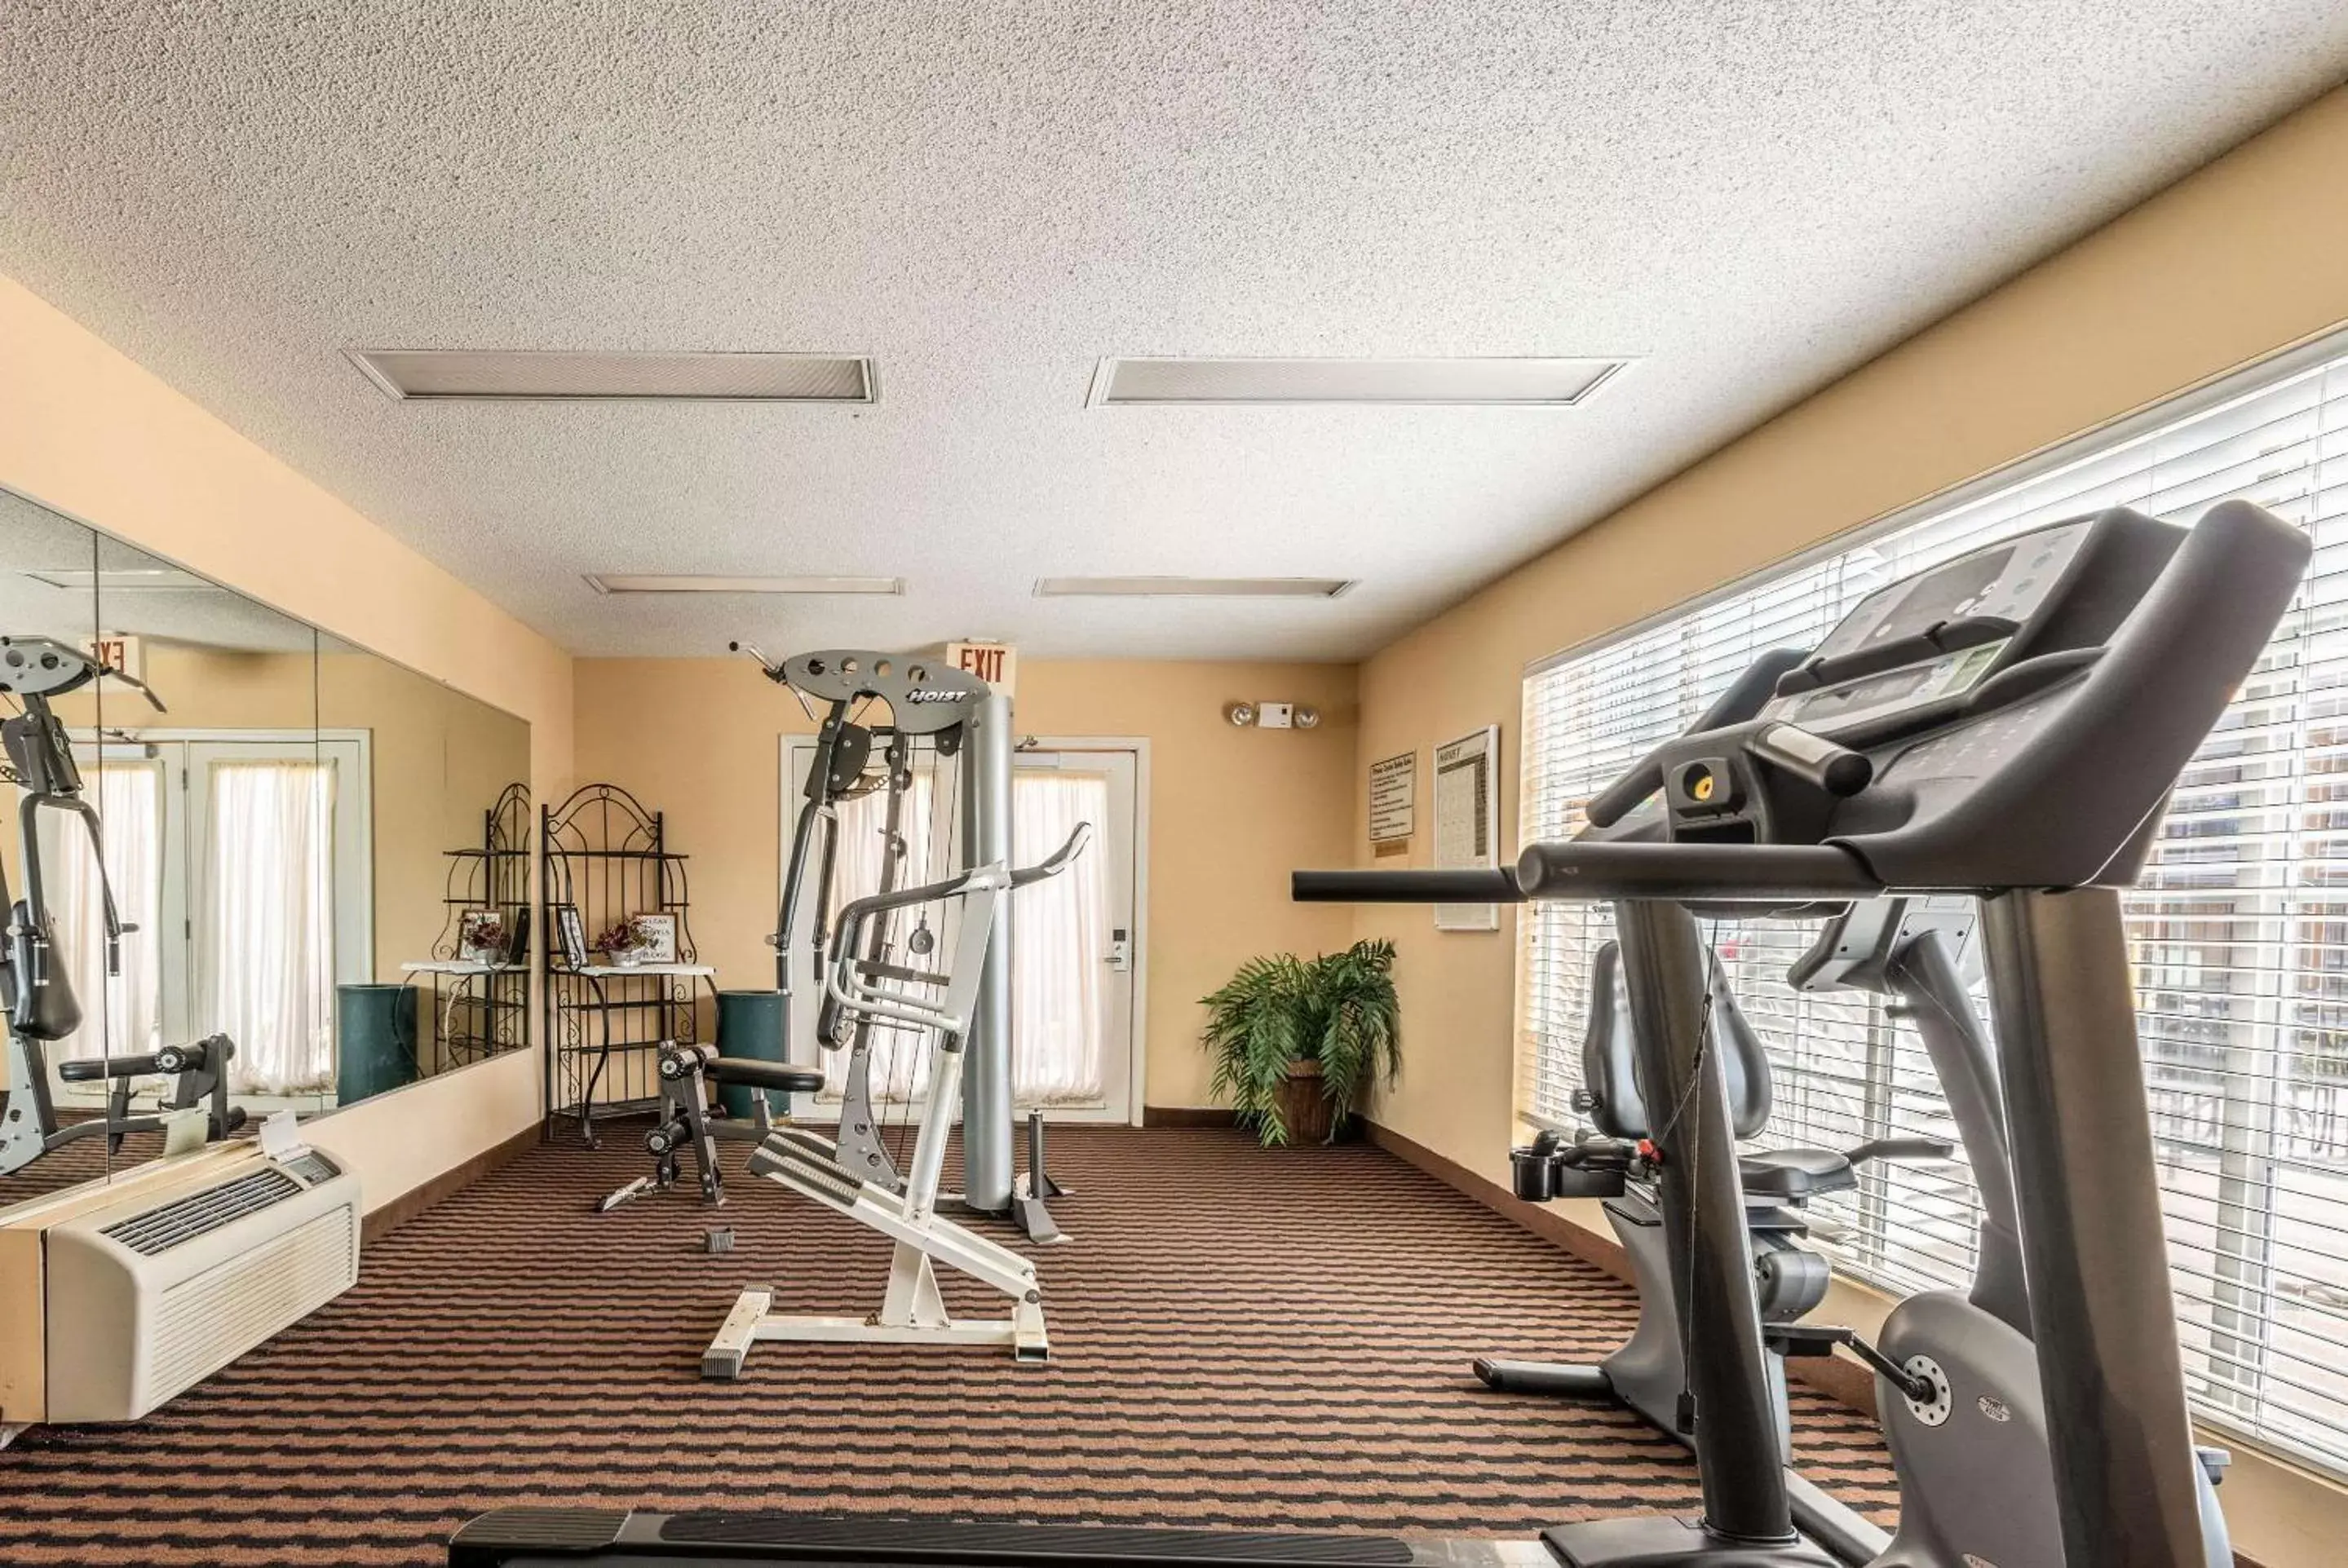 Fitness centre/facilities, Fitness Center/Facilities in Quality Inn Decatur River City